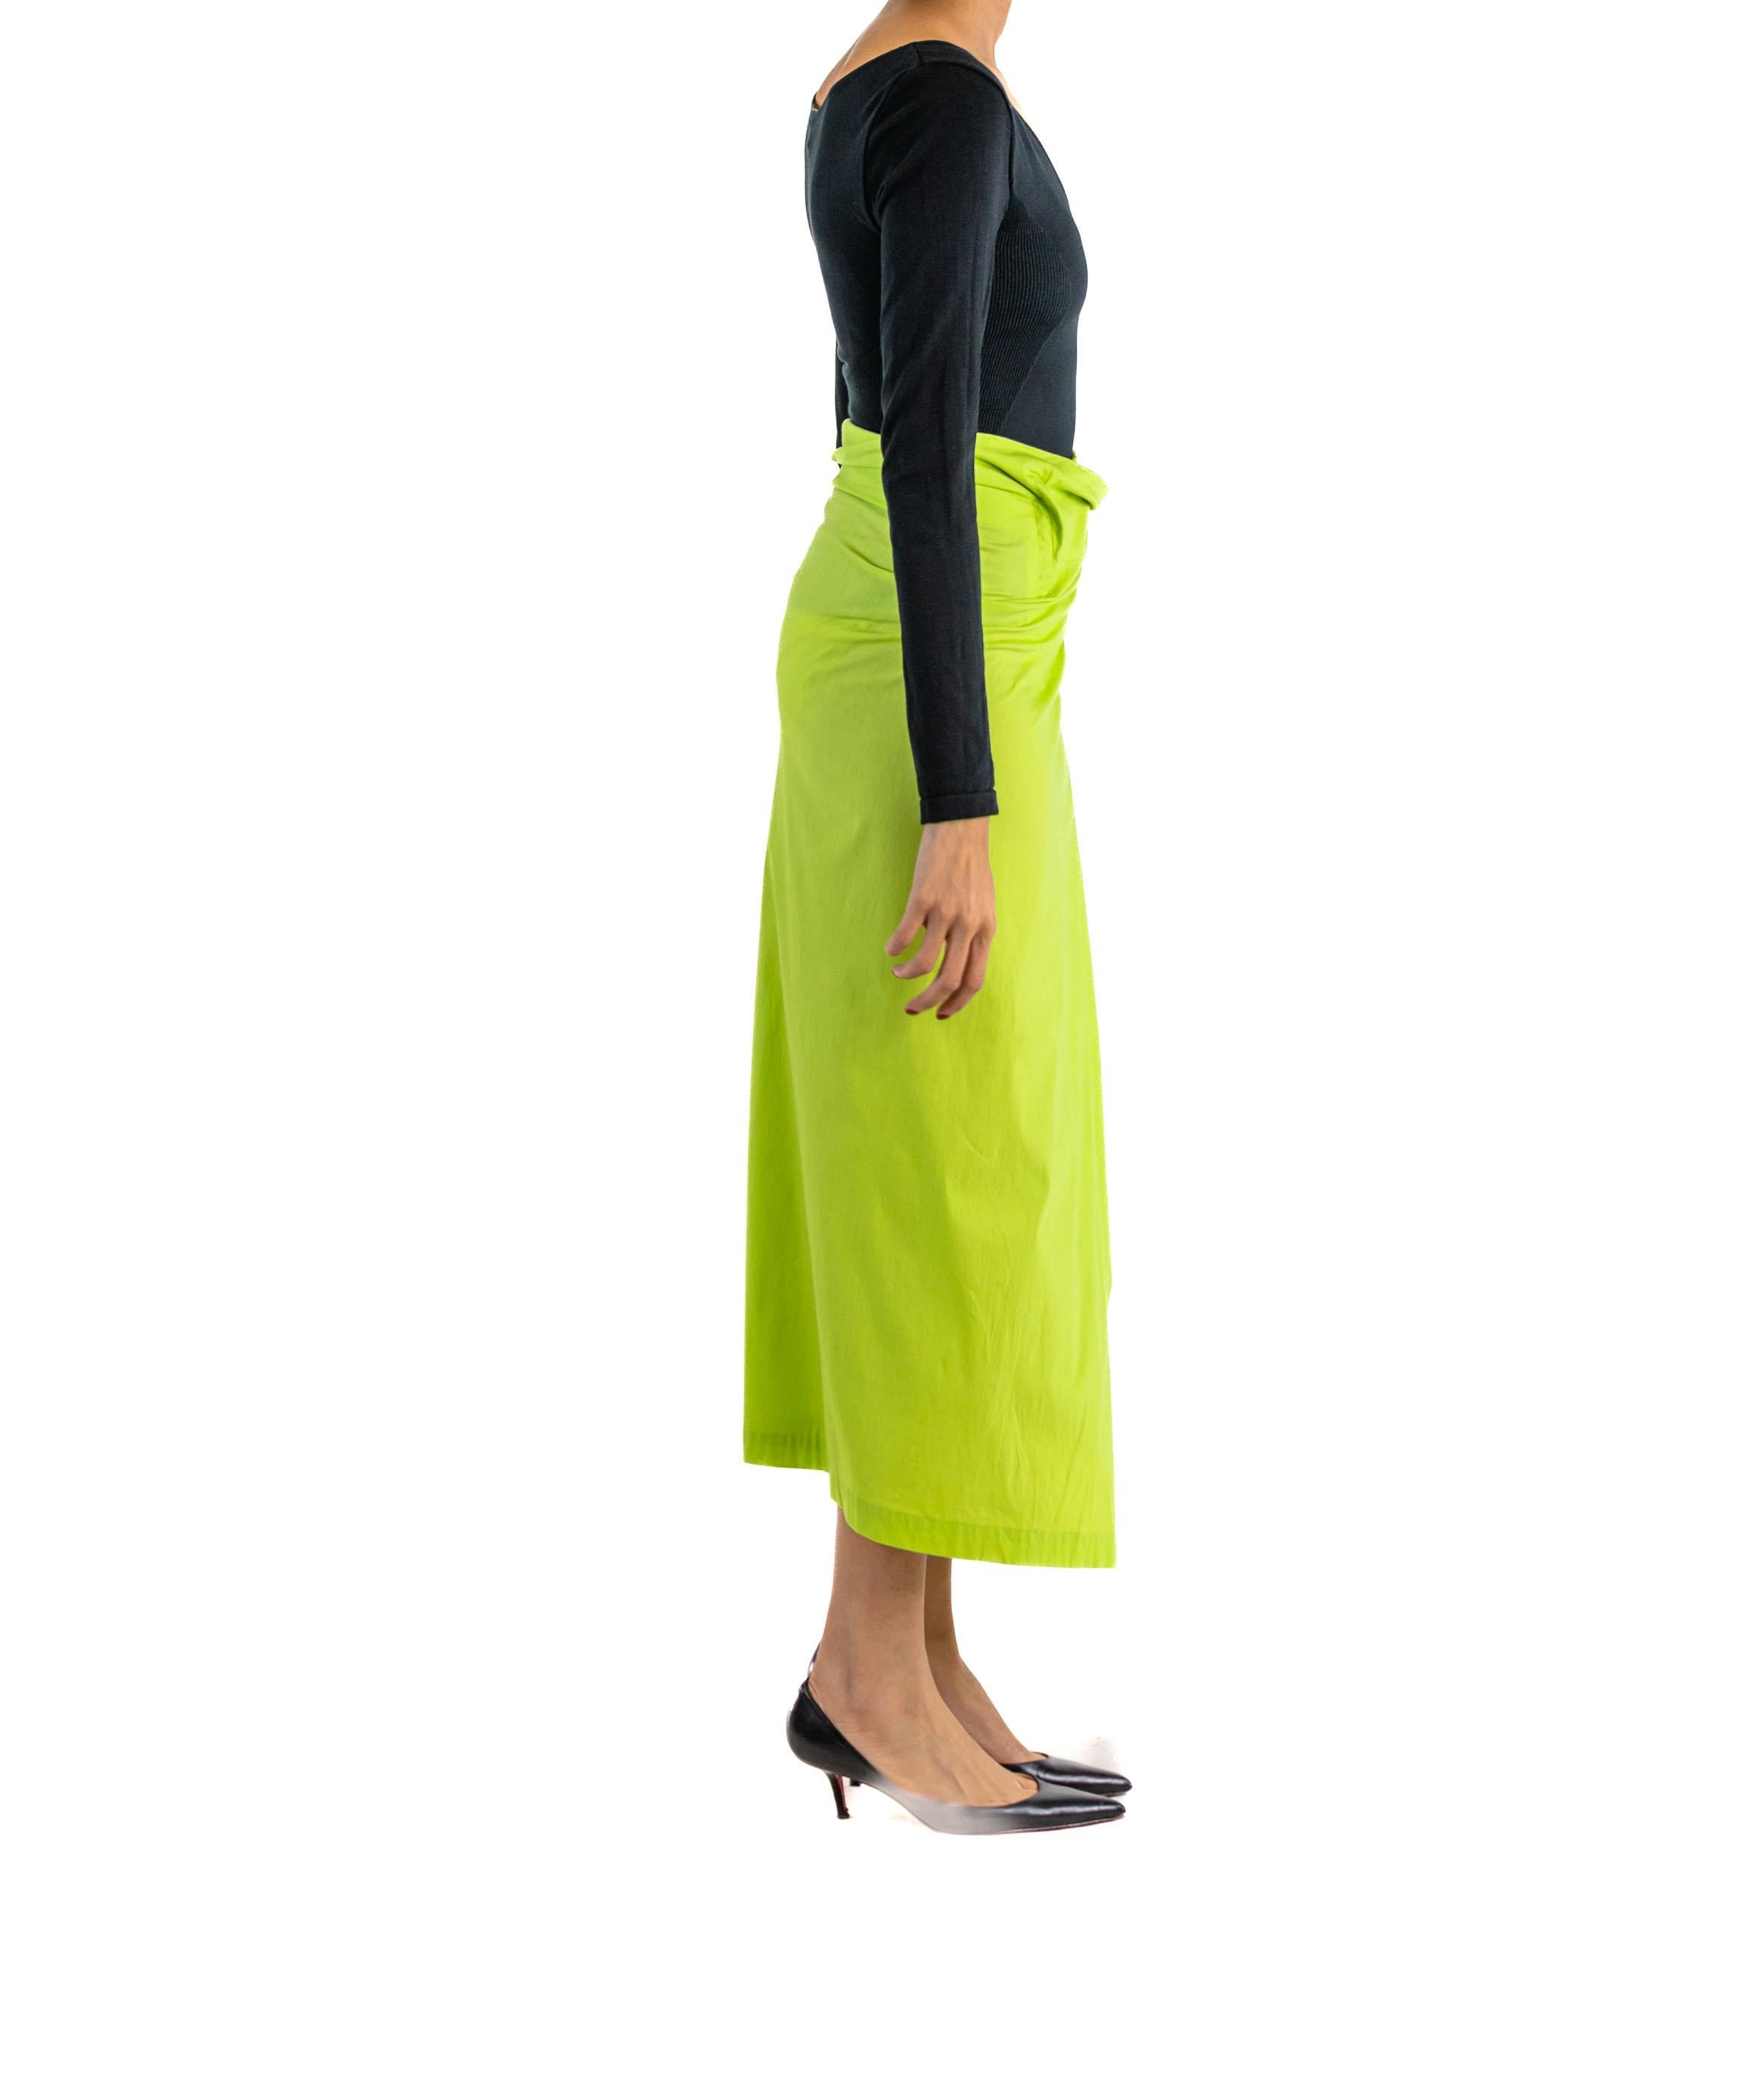 1990S ISSEY MIYAKE Lime Green & Black Rayon Blend Scoop Neck Top Skirt Ensemble In Excellent Condition For Sale In New York, NY